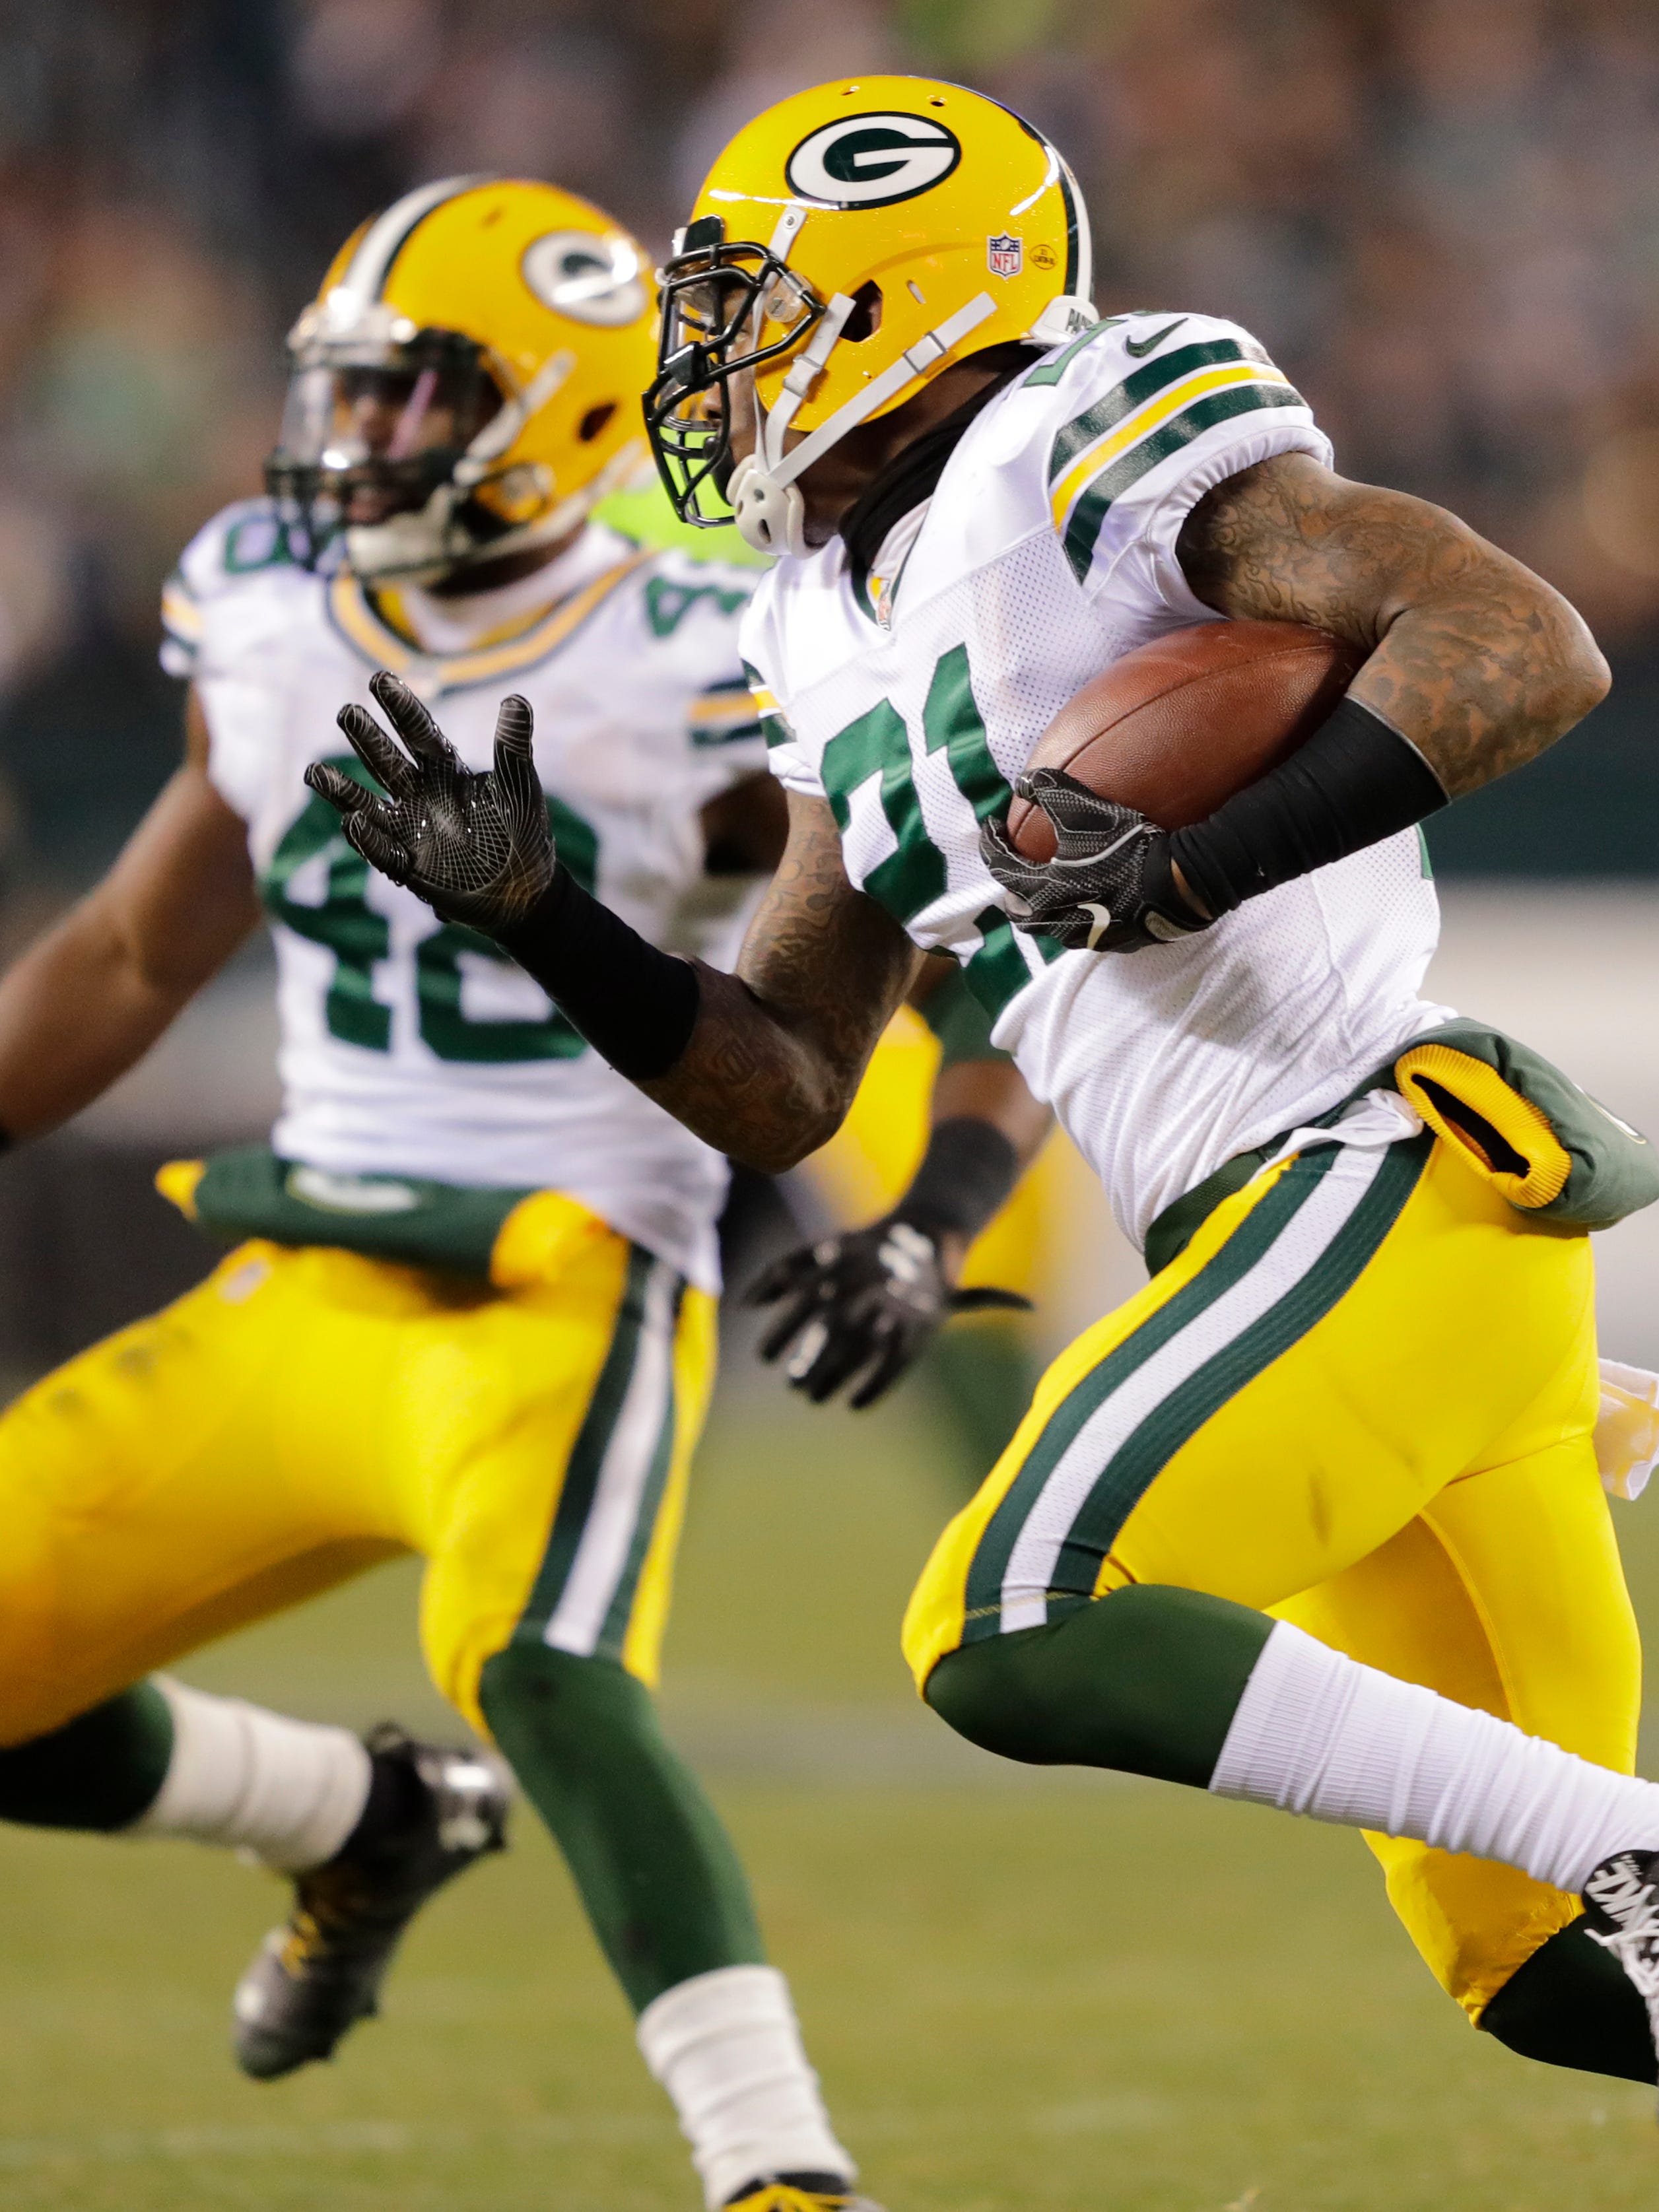 Green Bay Packers' Ha Ha Clinton-Dix runs back an interception in the third quarter.

The Green Bay Packers play against the Philadelphia Eagles Monday, November 28, 2016, at Lincoln Financial Field in Philadelphia, Pa.